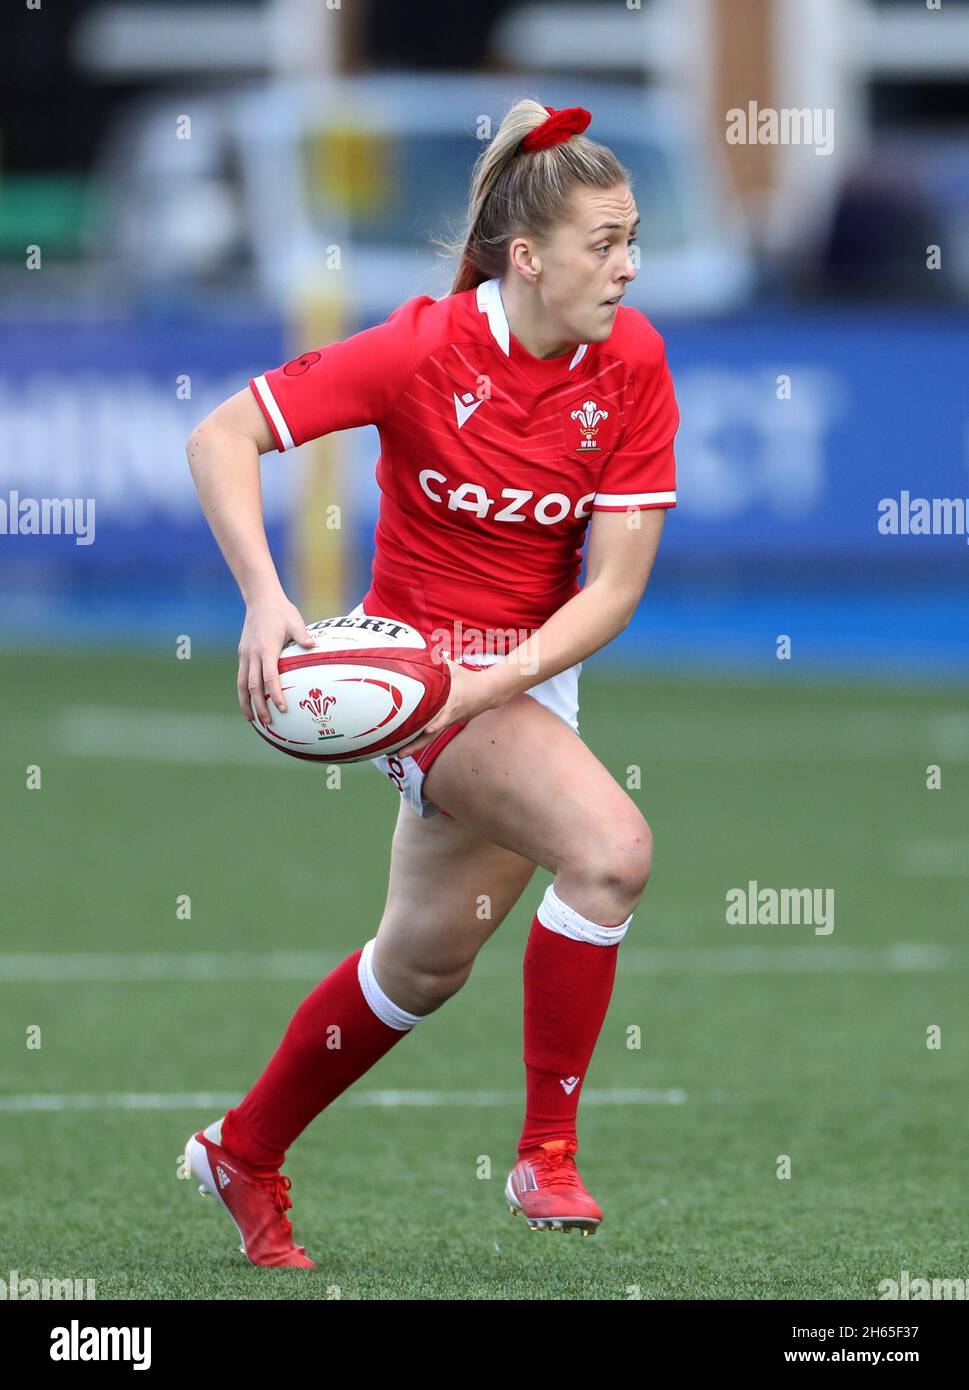 Wales' Hannah Jones during the Autumn International match at Cardiff Arms park, Cardiff. Picture date: Saturday November 13, 2021. See PA story RUGBYU Wales Women. Photo credit should read: Bradley Collyer/PA Wire. RESTRICTIONS: Use subject to restrictions. Editorial use only, no commercial use without prior consent from rights holder. Stock Photo